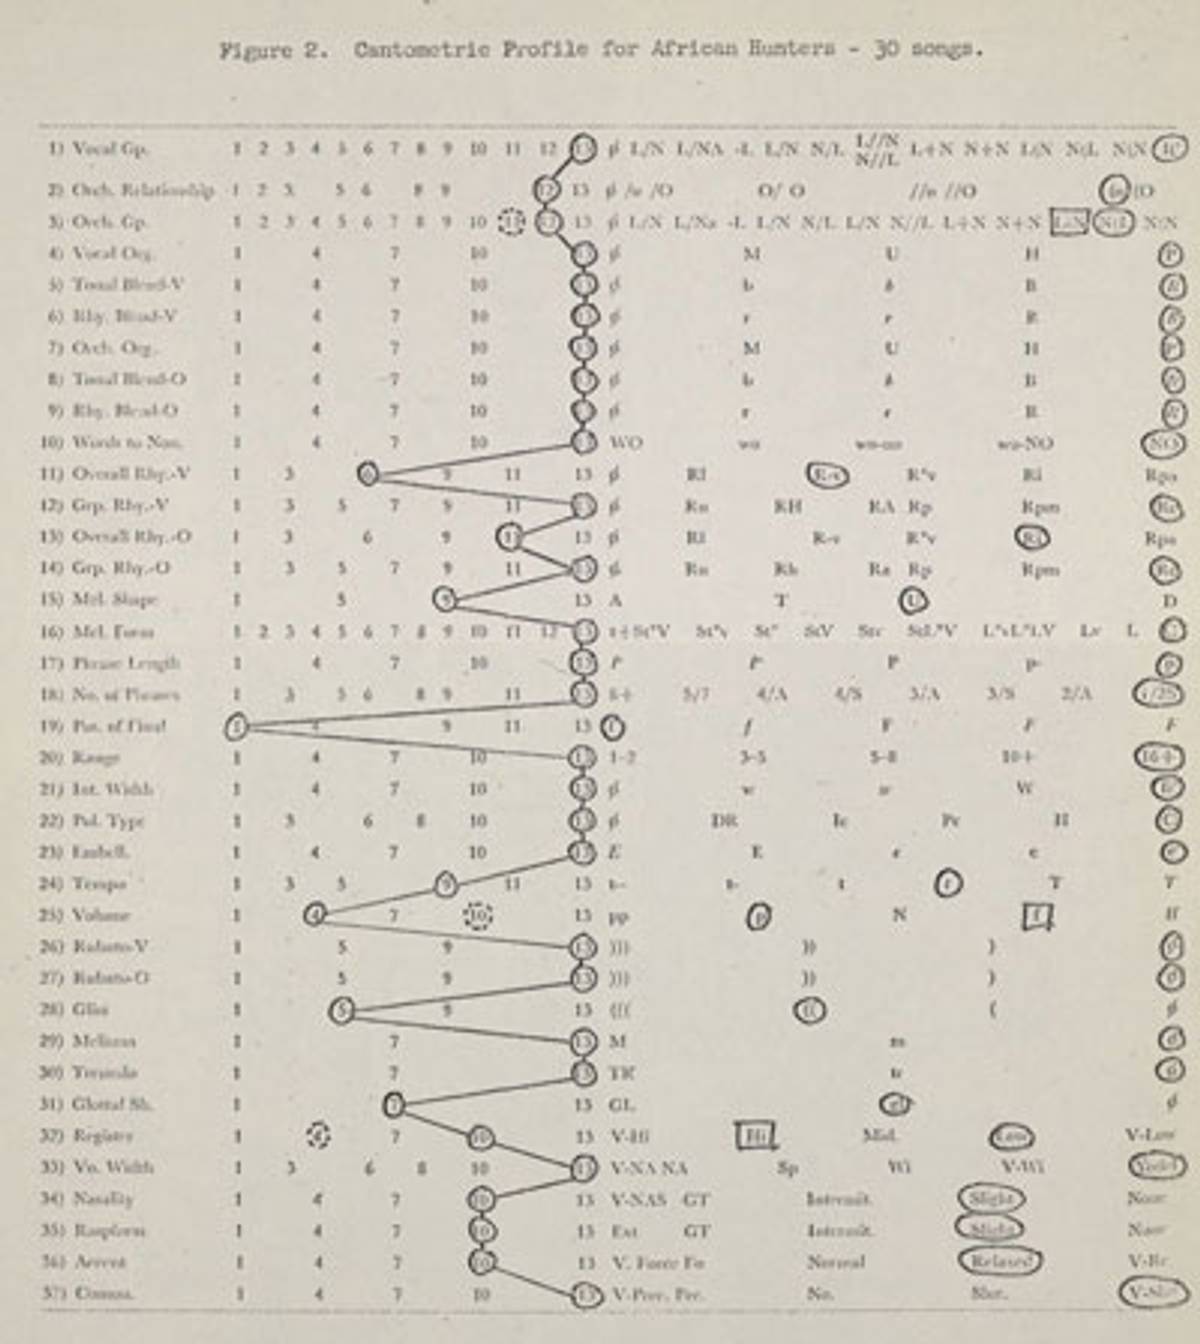 Cantometric Profile for African Hunters (Alan Lomax Collection, Manuscripts, The Homogeneity of African-New World Negro Musical Style, 1967, Library of Congress)